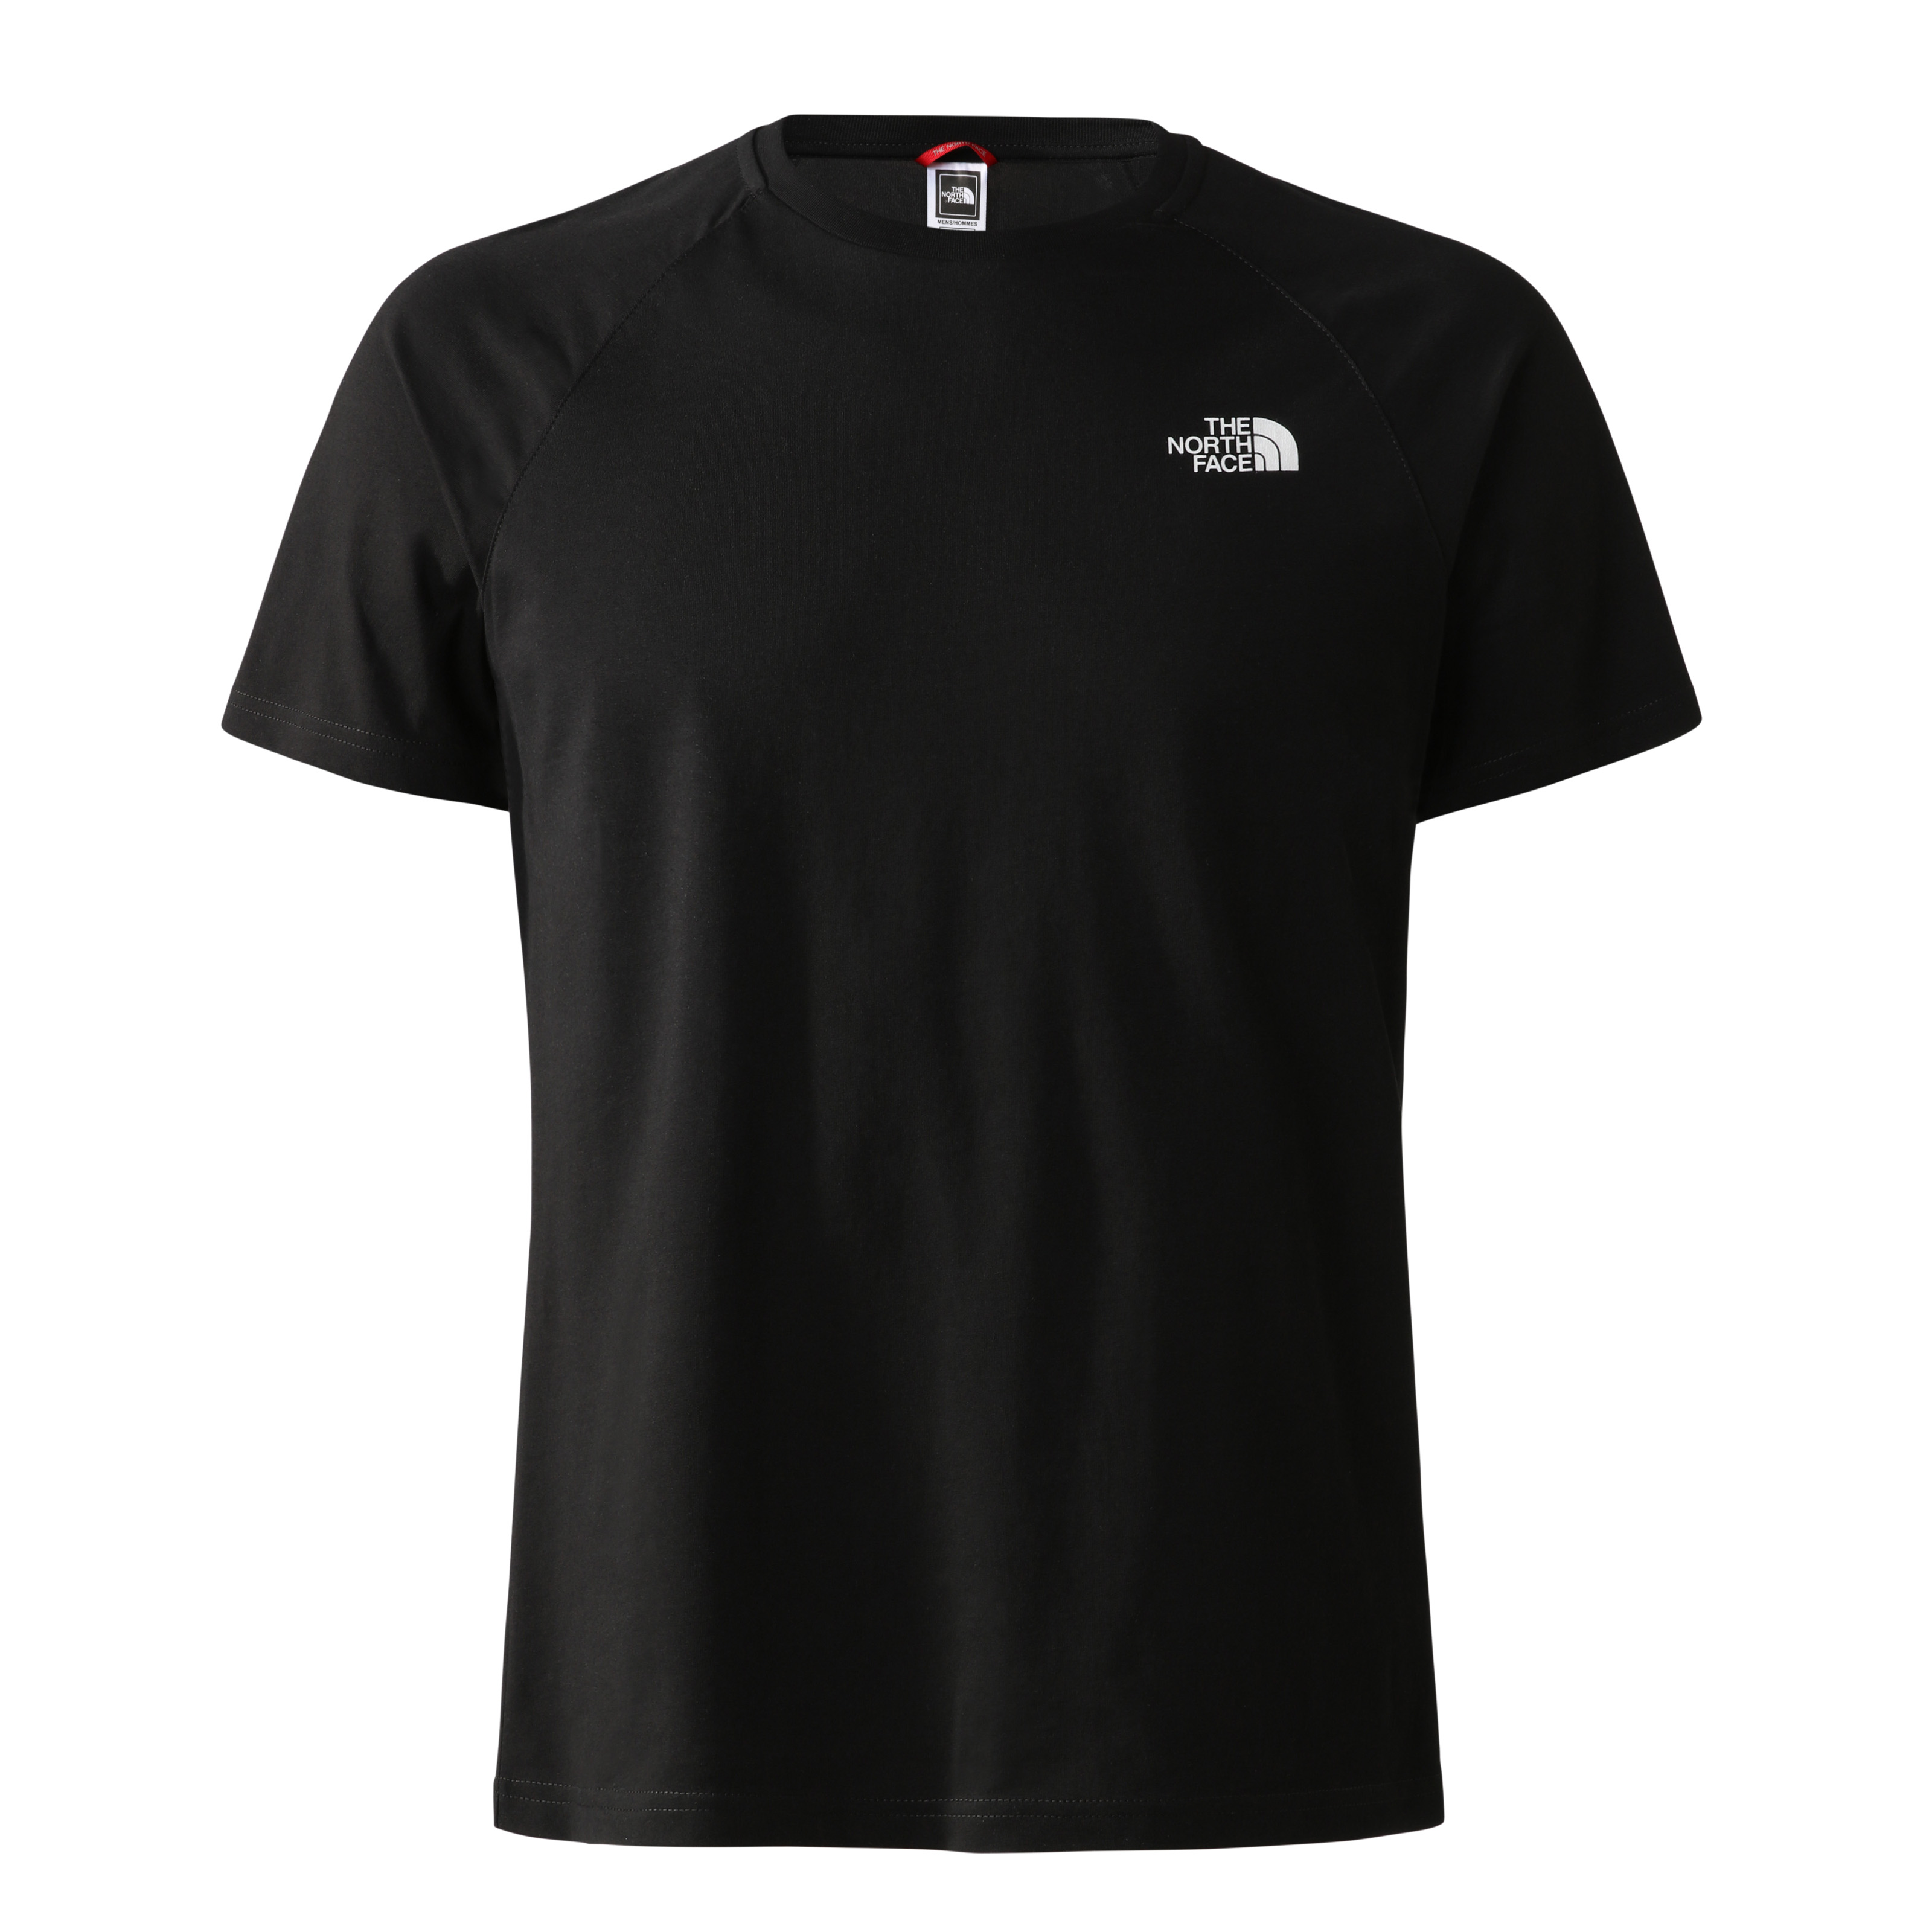 The North Face Men's T-Shirt North Faces Black/Led Yellow